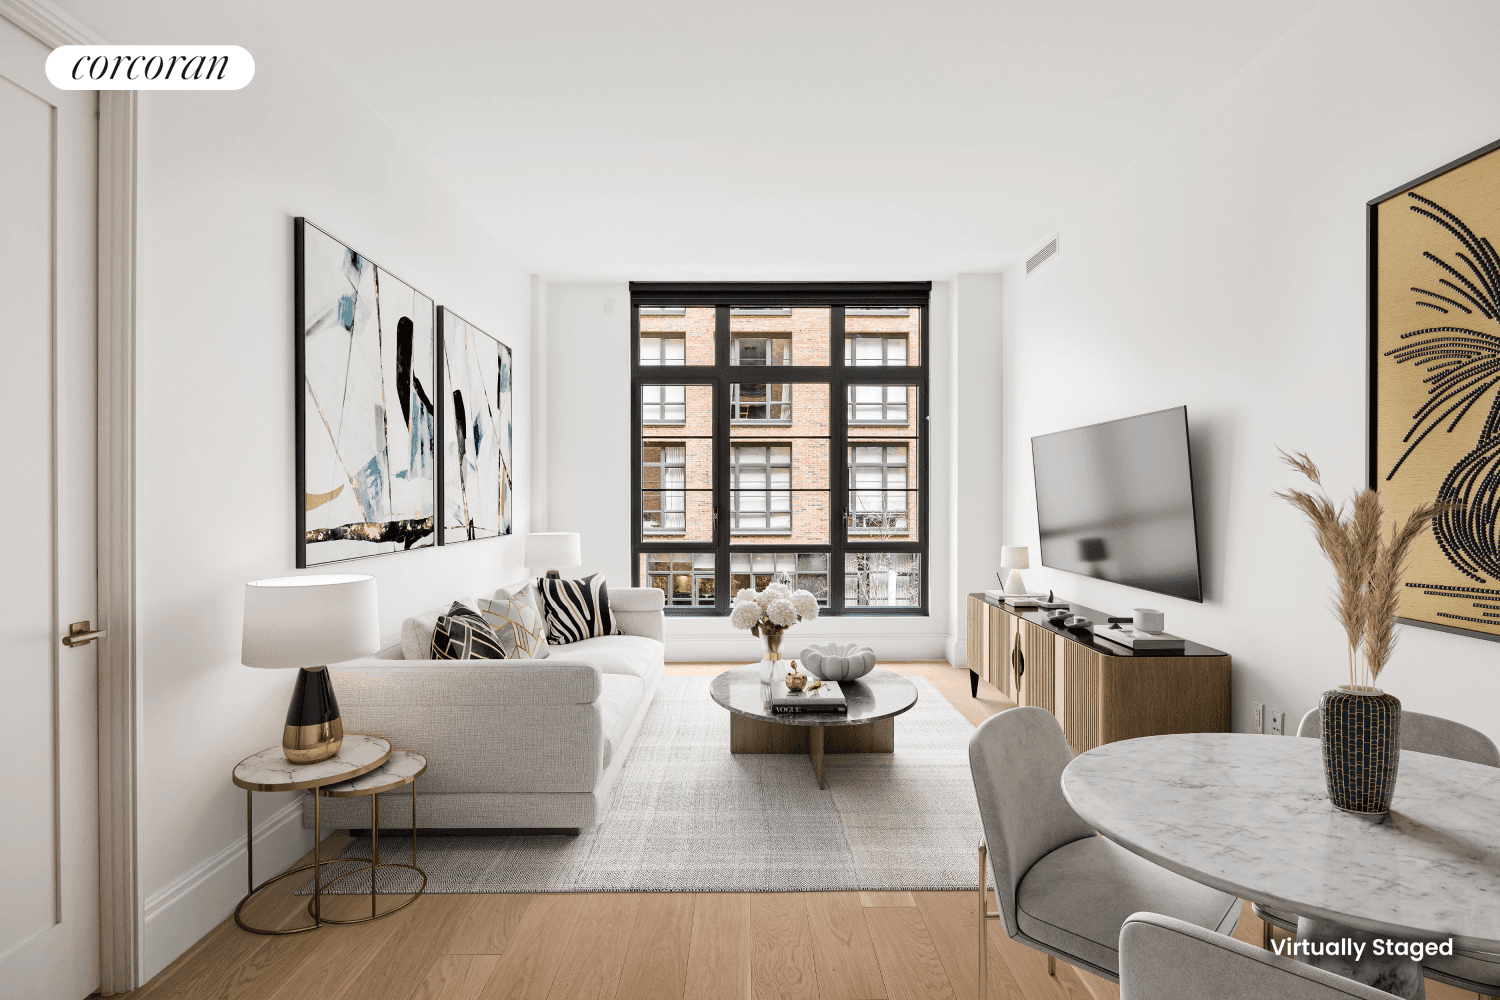 Residence 2S at Steiner East Village Condominium is an impeccably designed, pin drop quiet 2 bedroom, 2 bathroom home located at 438 East 12th Street, just two blocks from Tomkins ...